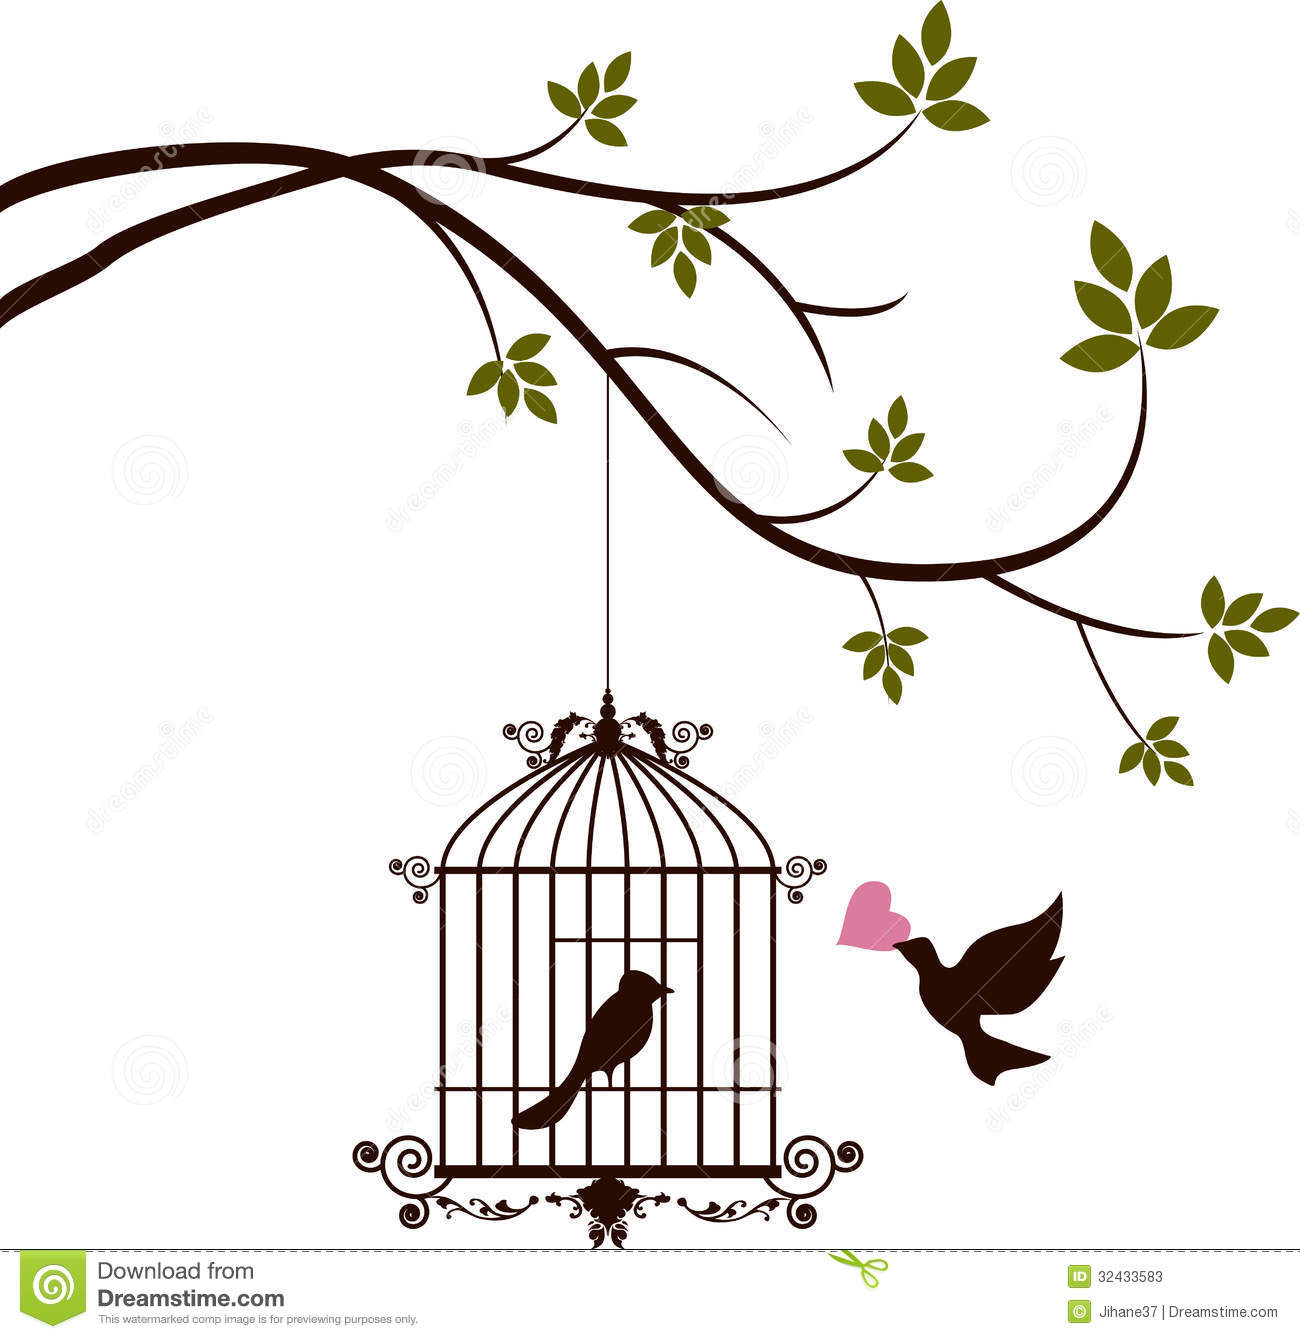 Bird Are Bringing Love To The Bird In The Cage Stock Photos   Image    